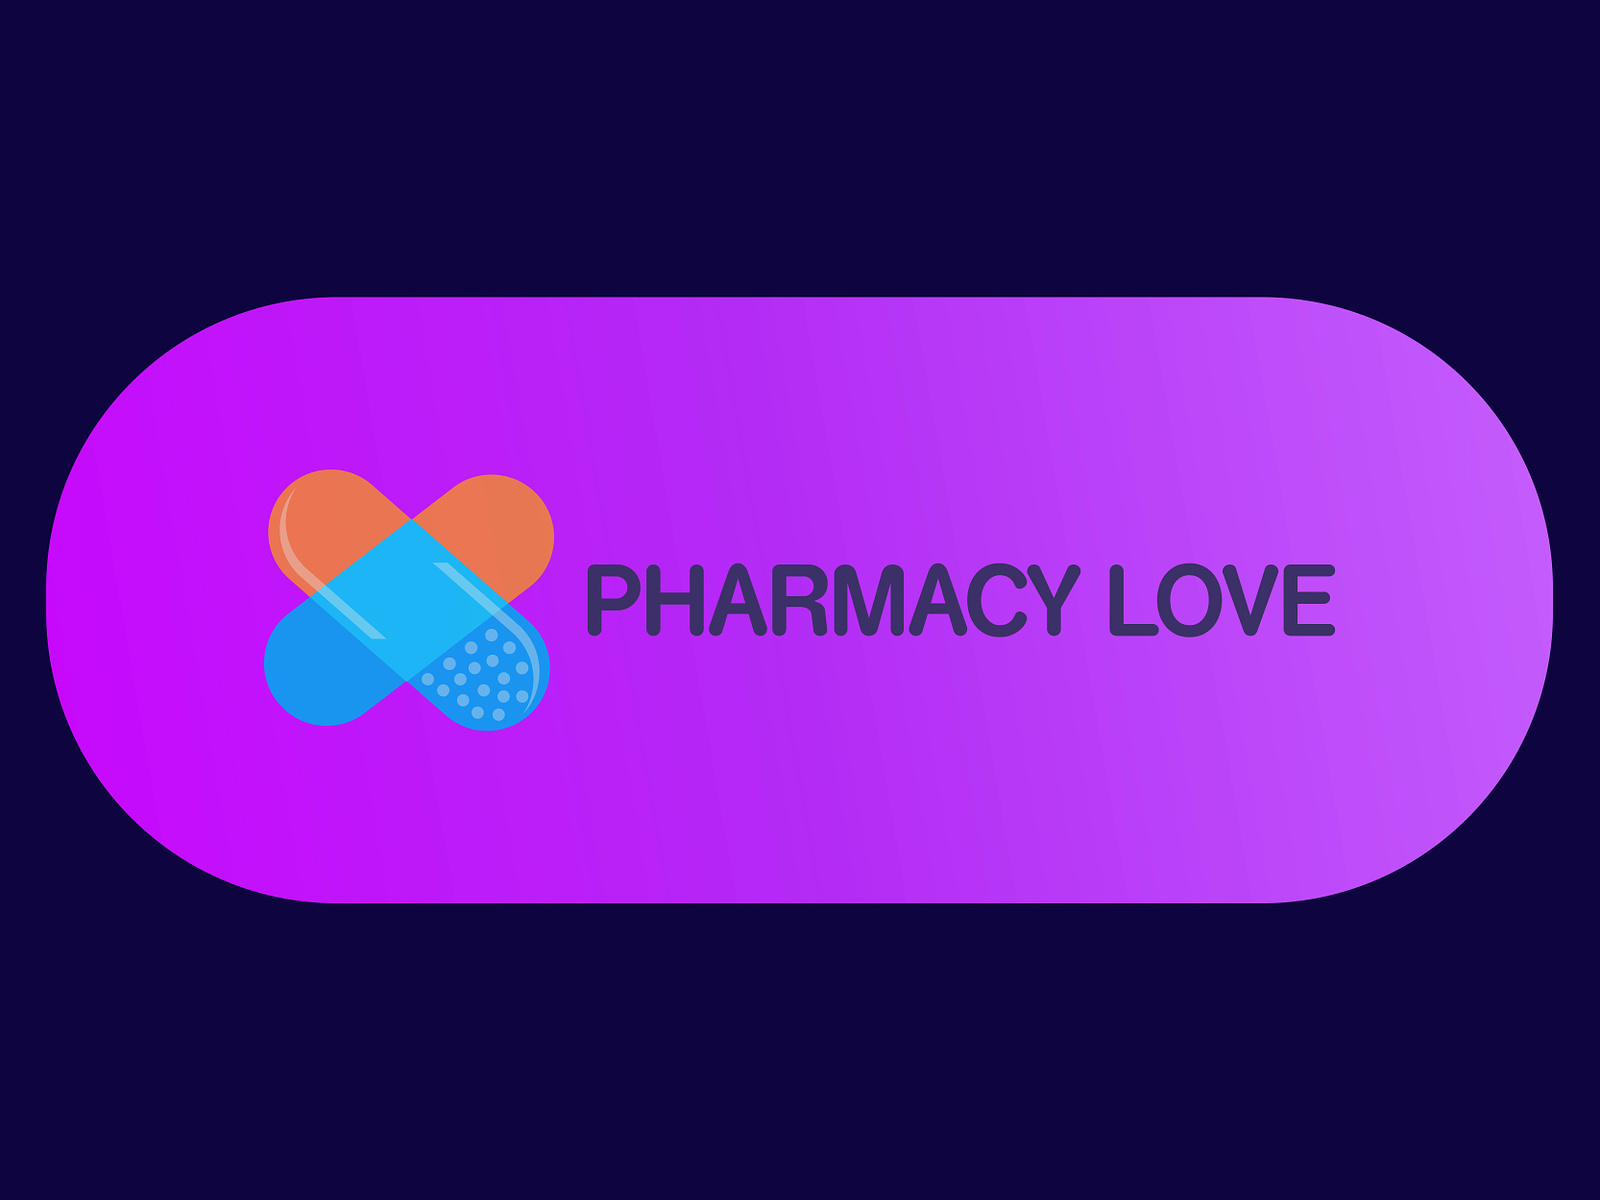 Medical & Pharmacy logo design by Sonia Afroz on Dribbble